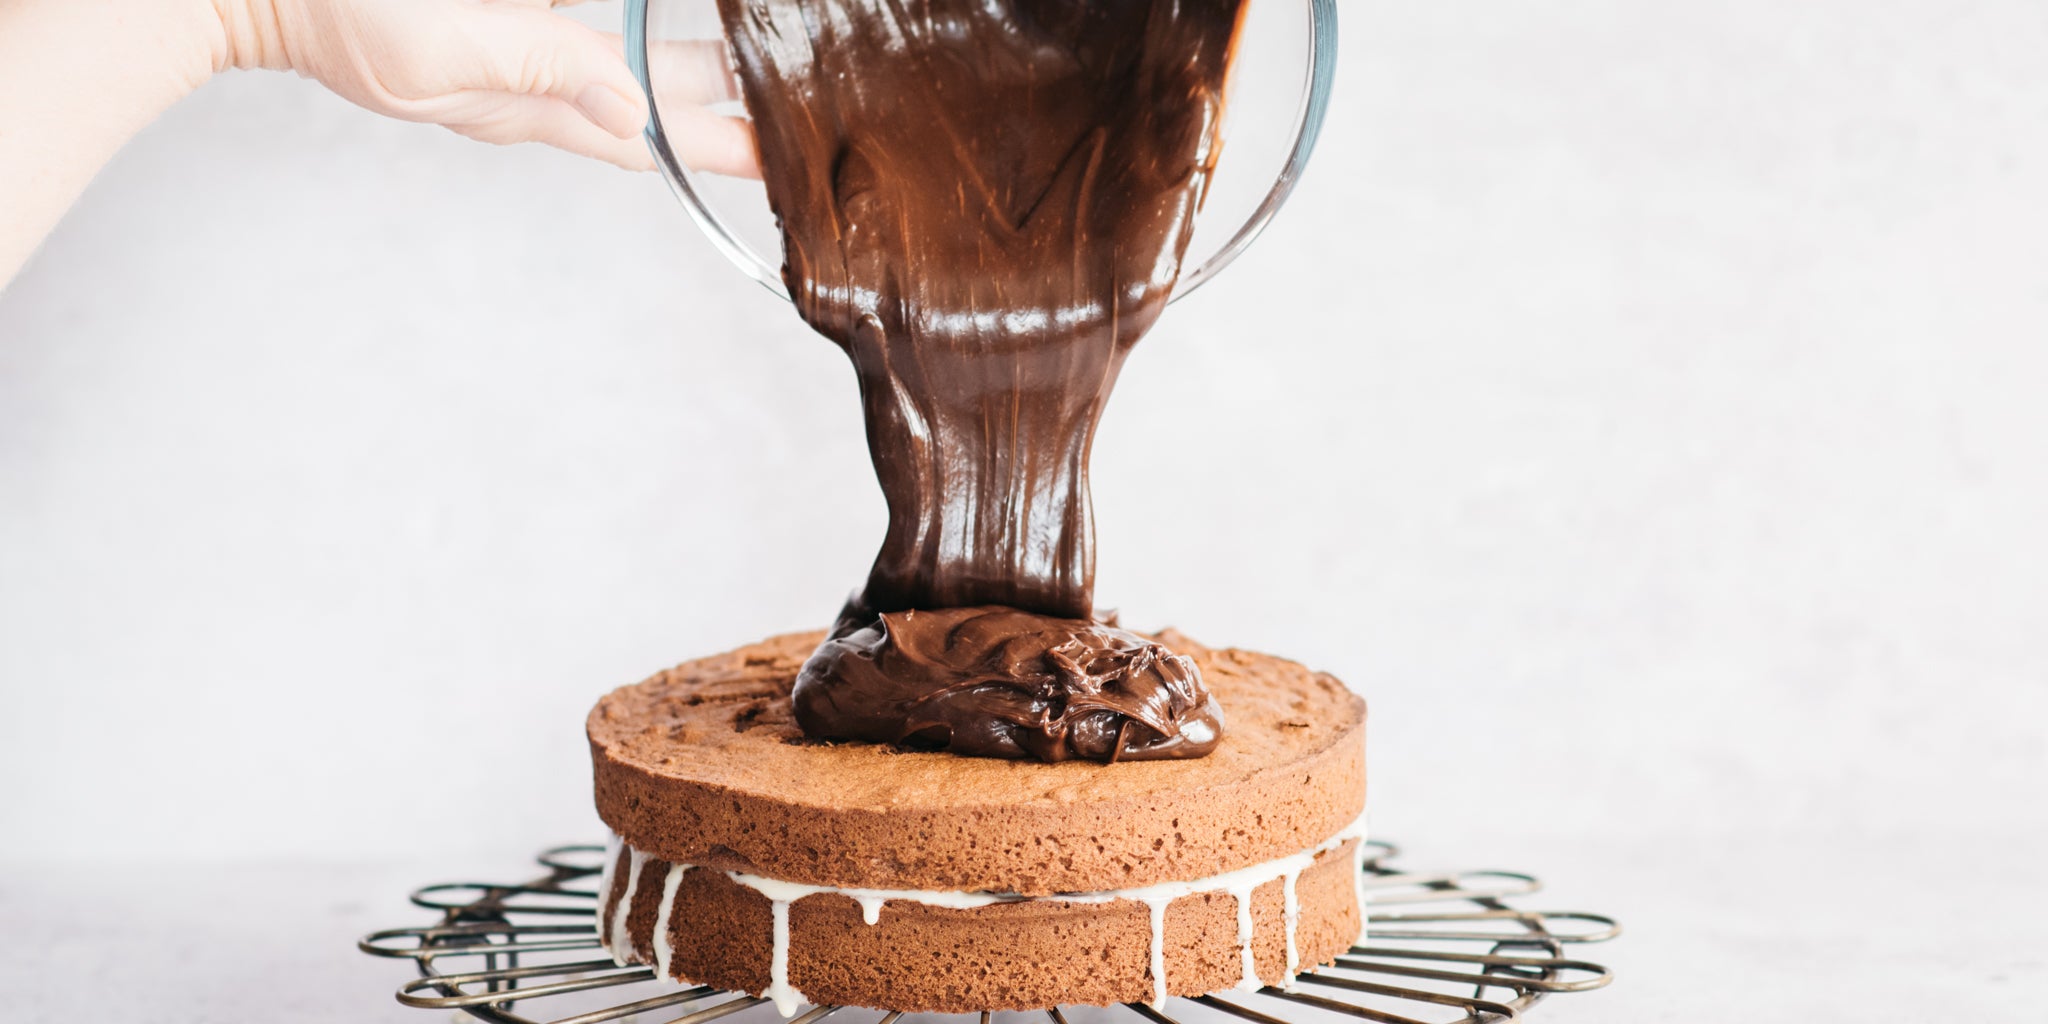 Bowl of melted chocolate being poured on top of sponge cake on cooling rack